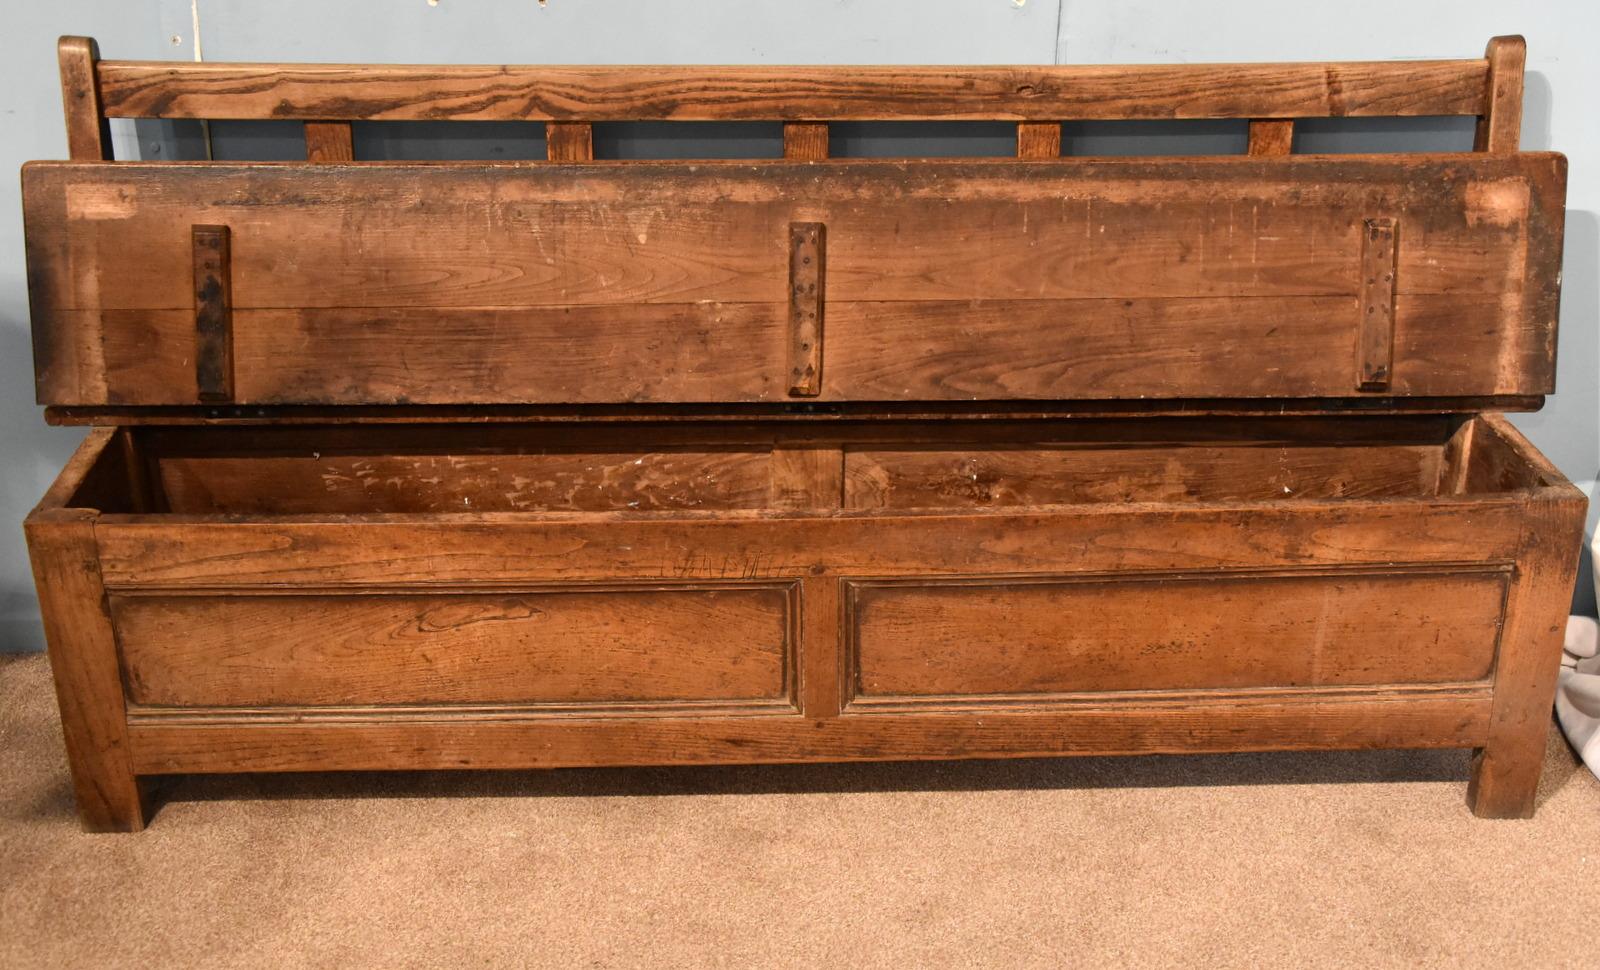 French Provincial A Good Pair of Mid 19th Century French Breton Chestnut Benches For Sale